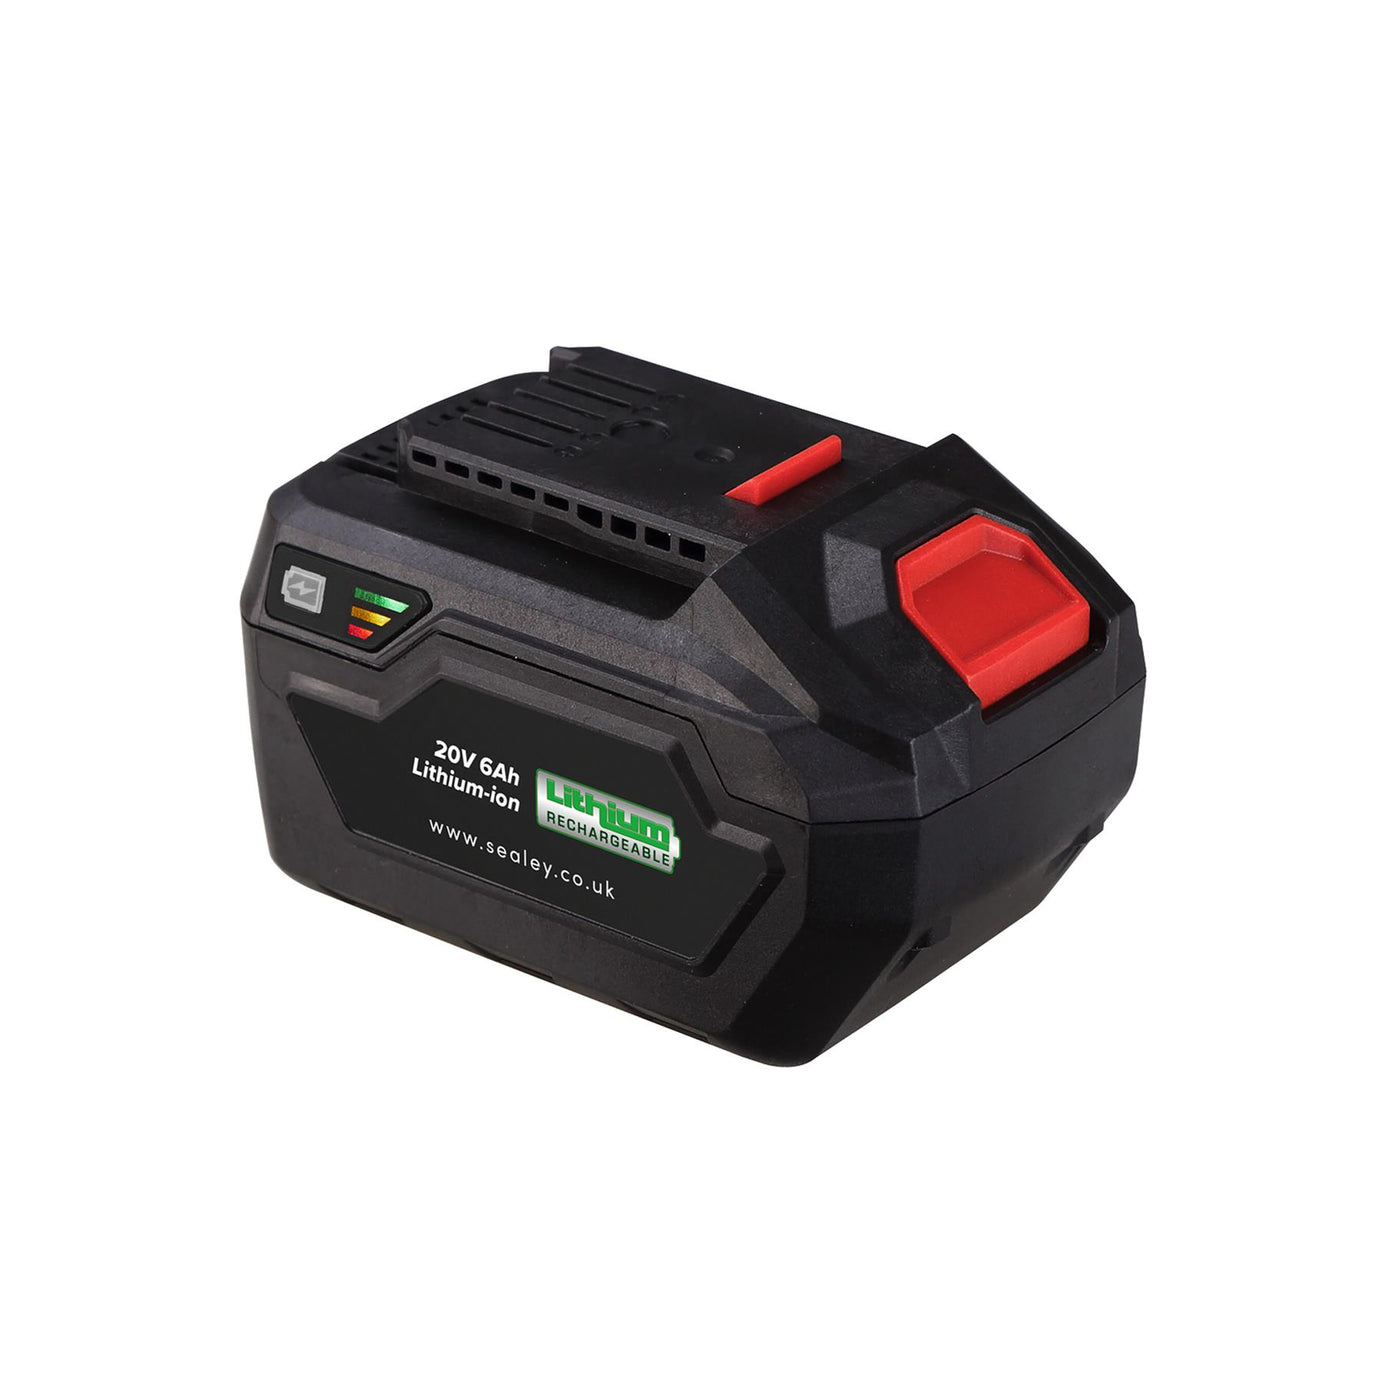 Sealey Power Tool Battery 20V 6Ah Lithium-ion for SV20 Series